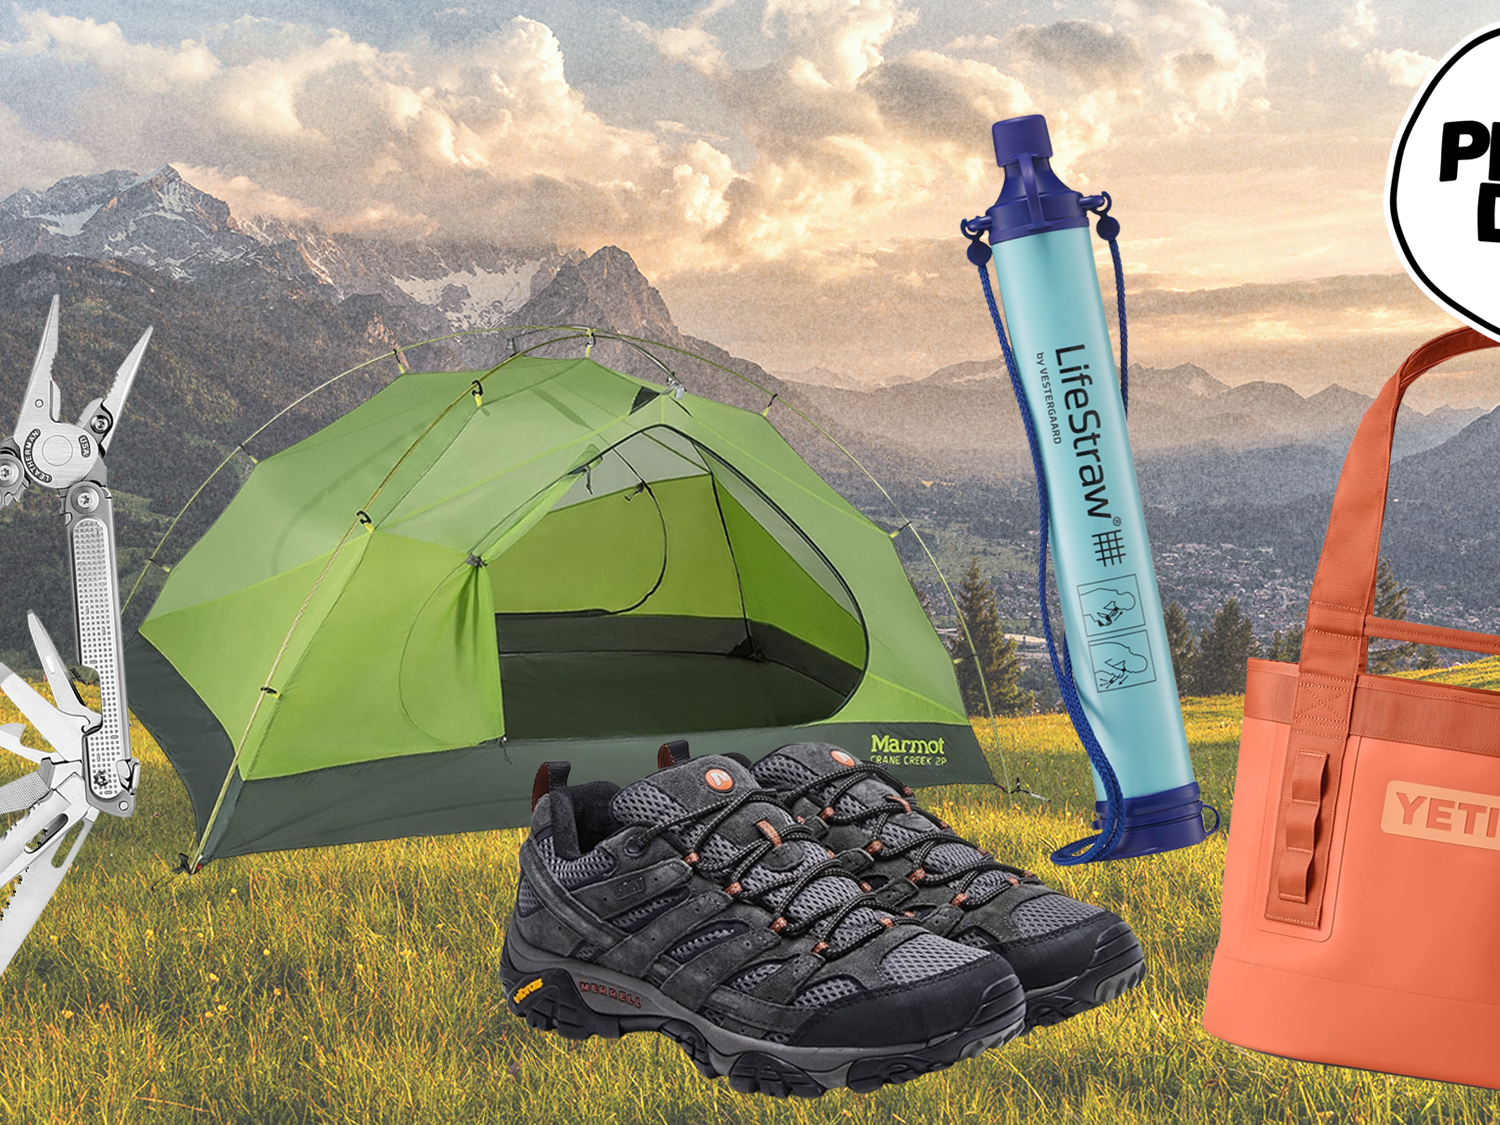 These Prime Day Camping Deals Heed the Call of the Wild